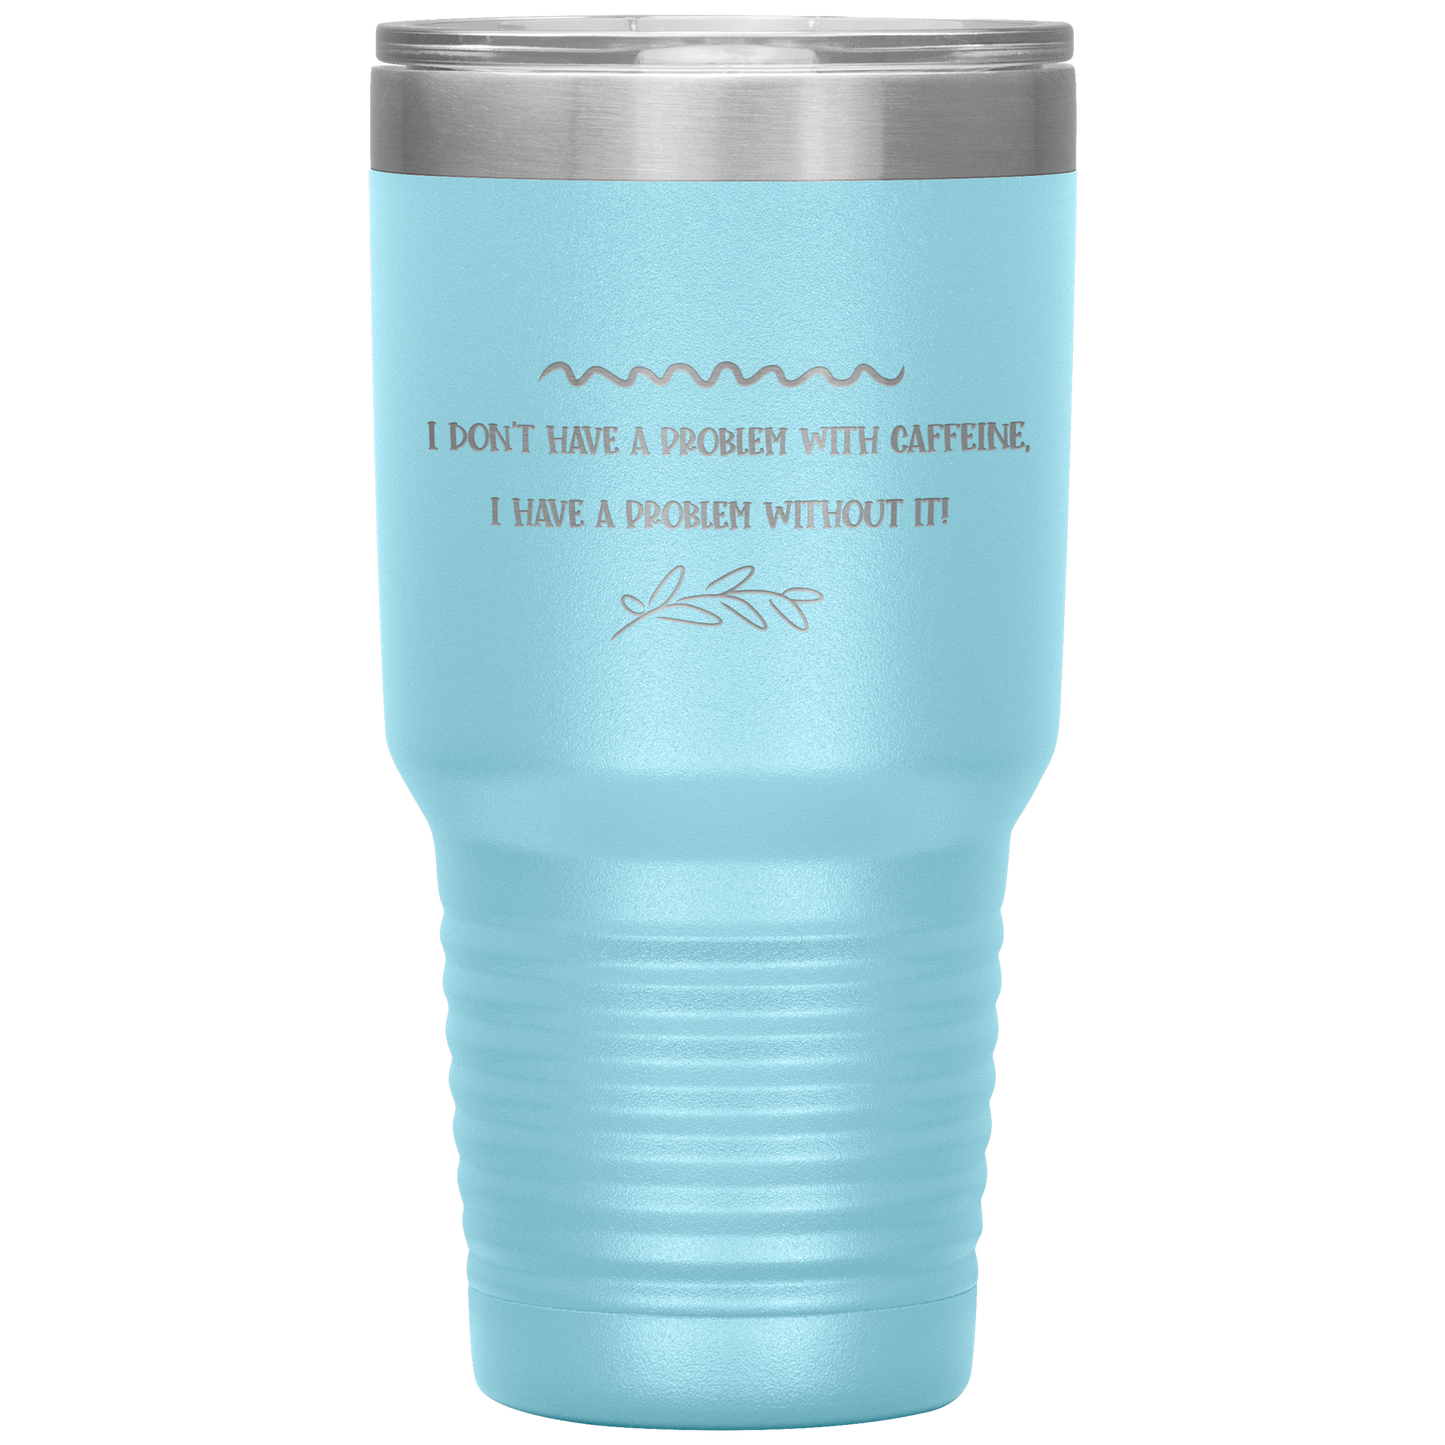 "I Don't Have a Problem with Caffeine" 30 oz. Insulated Stainless Steel Insulated Travel Coffee Cup with Lid